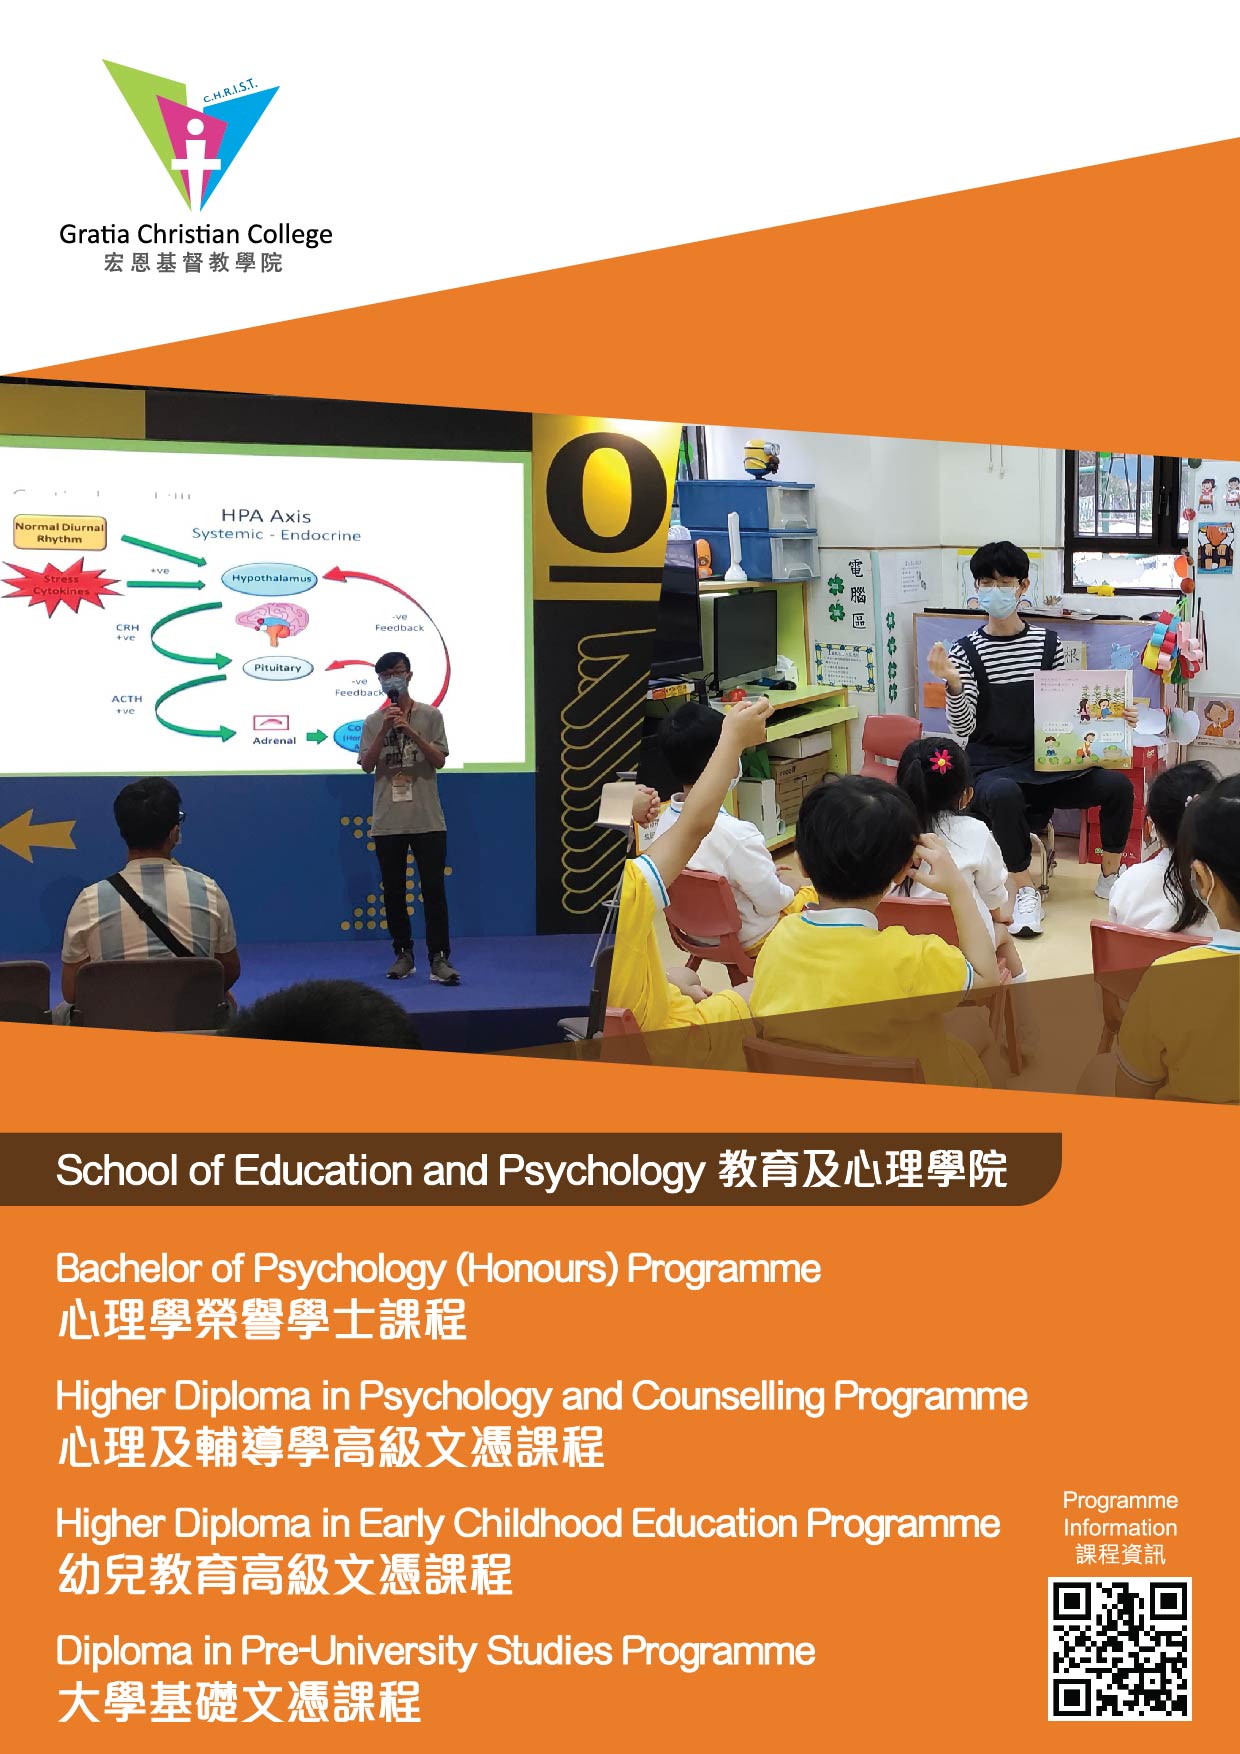 School of Education and Psychology Leaflet